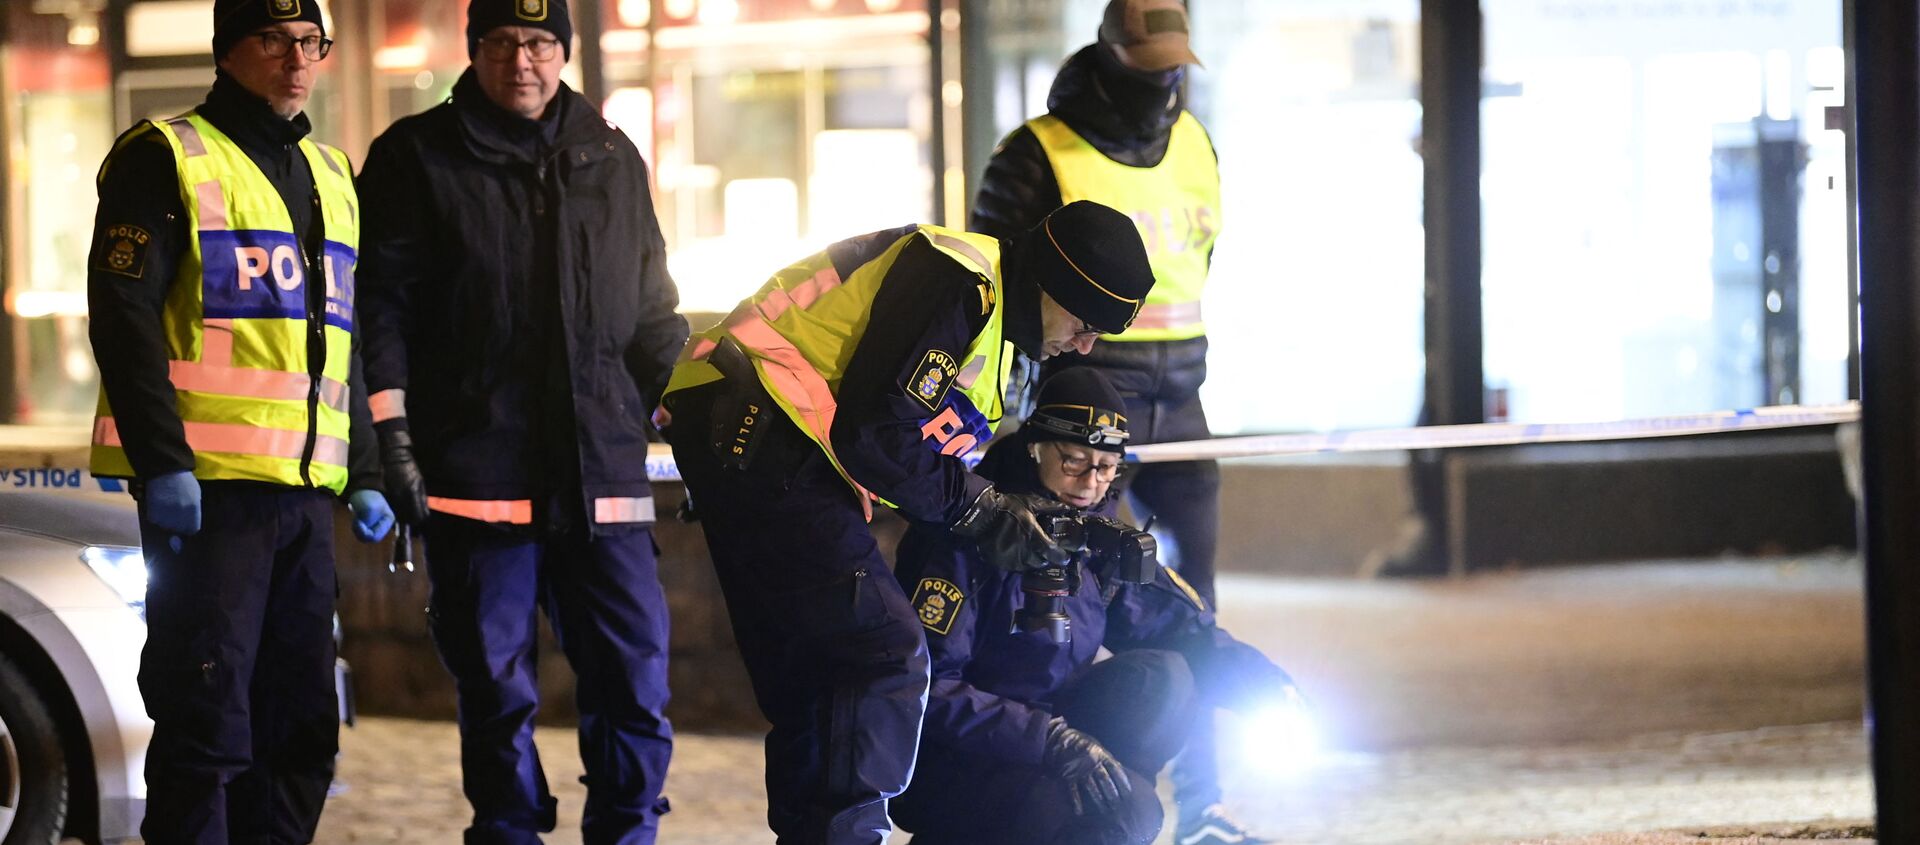 Police investigators work at the scene where a man attacked eight people with a sharp weapon, seriously injuring two, in the Swedish city of Vetlanda on 3 March 2021.  - Sputnik International, 1920, 05.03.2021